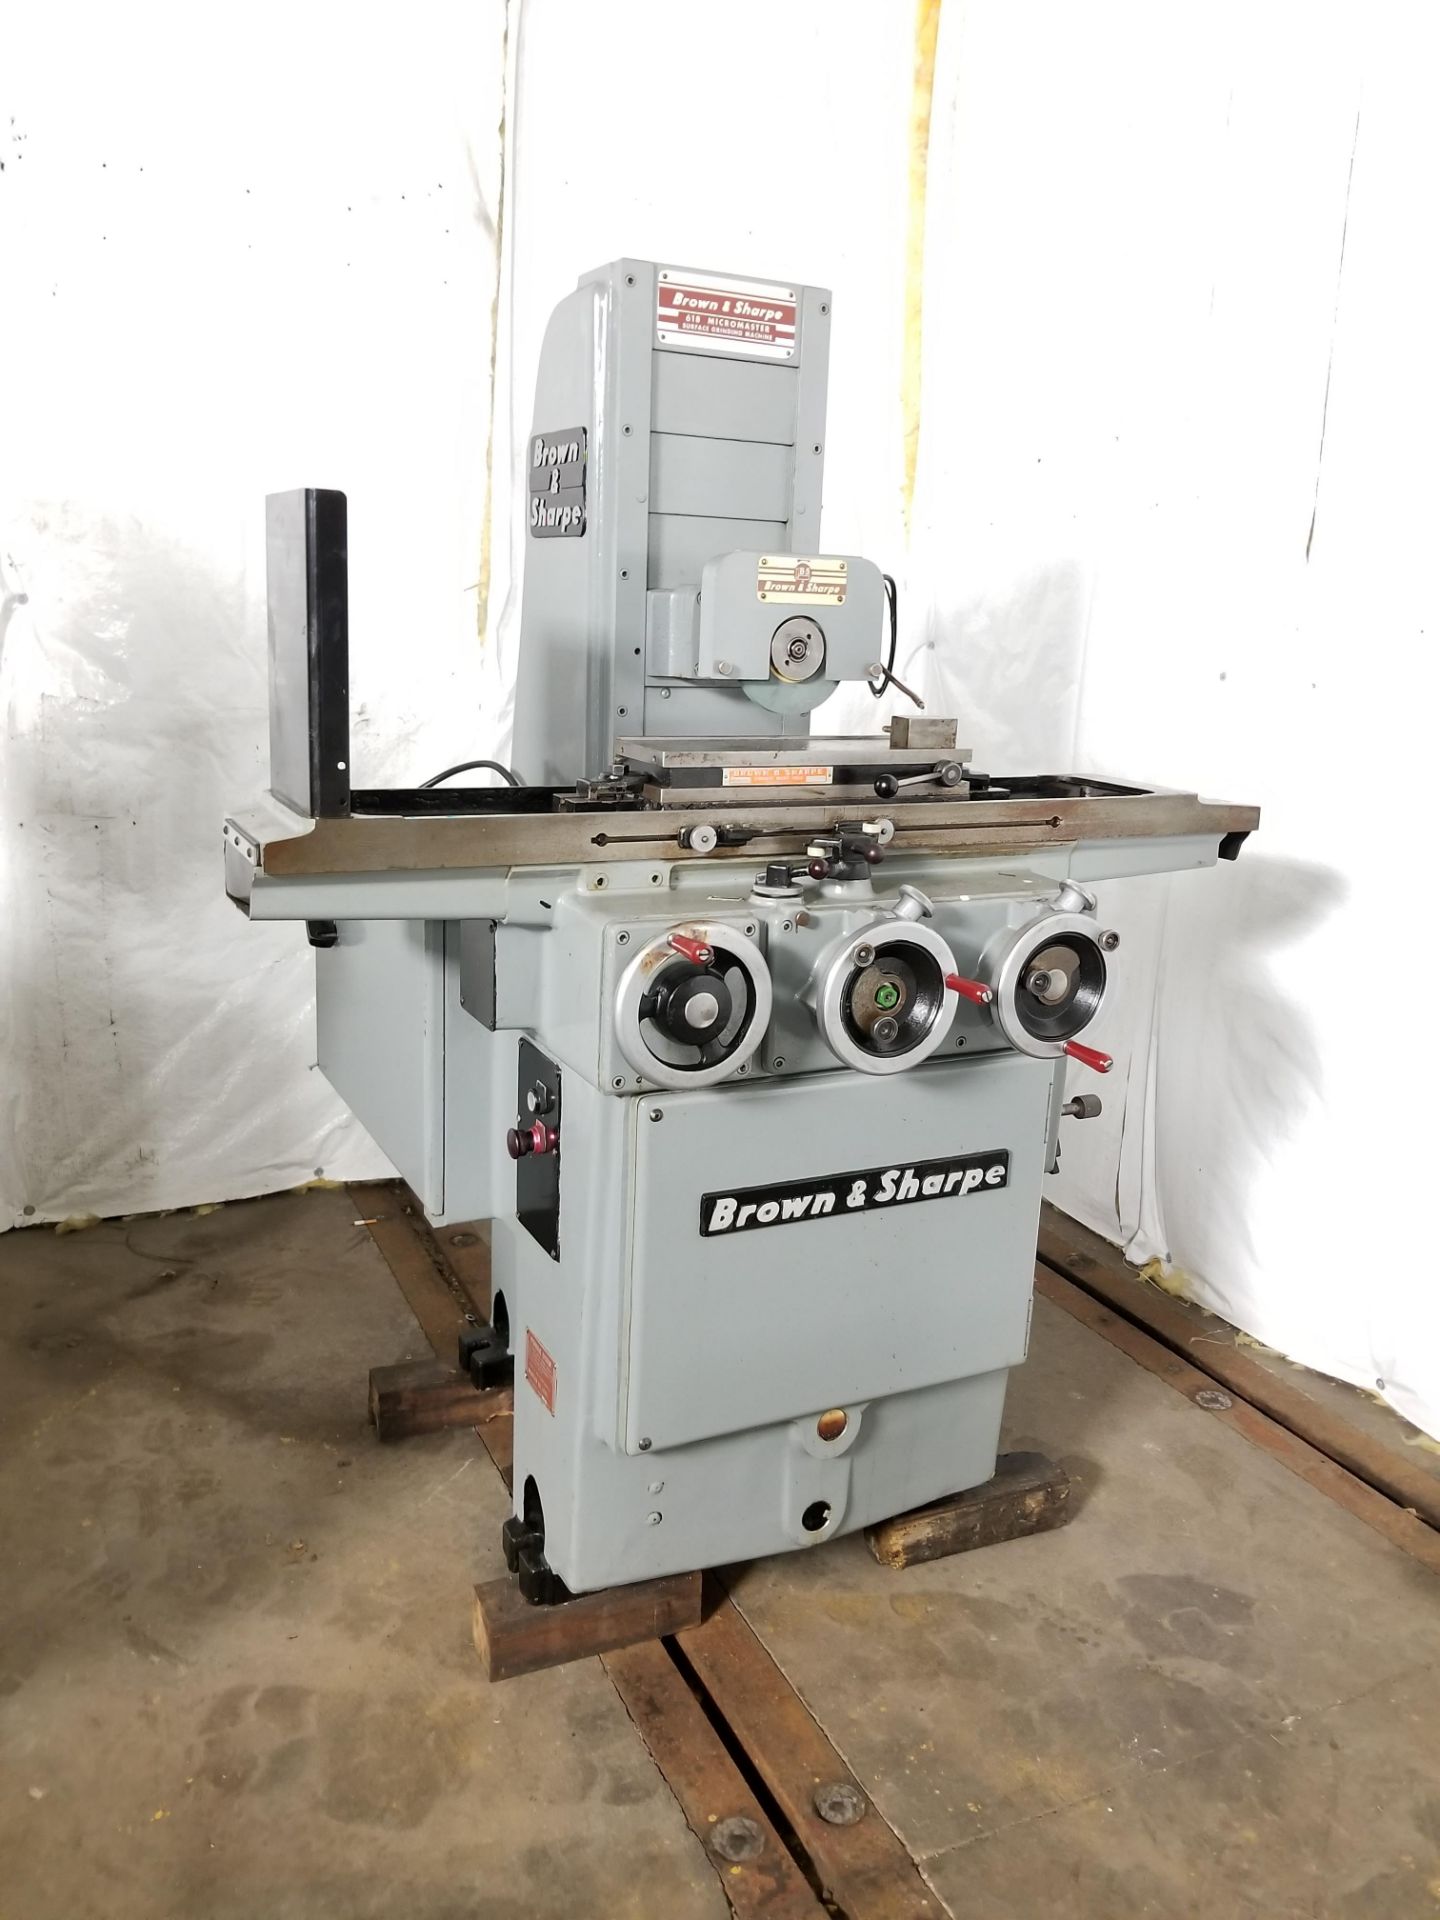 1966 BROWN & SHARPE MICROMASTER HYDRAULIC SURFACE GRINDER, MODEL 618, B&S PERMANENT MAGNETIC